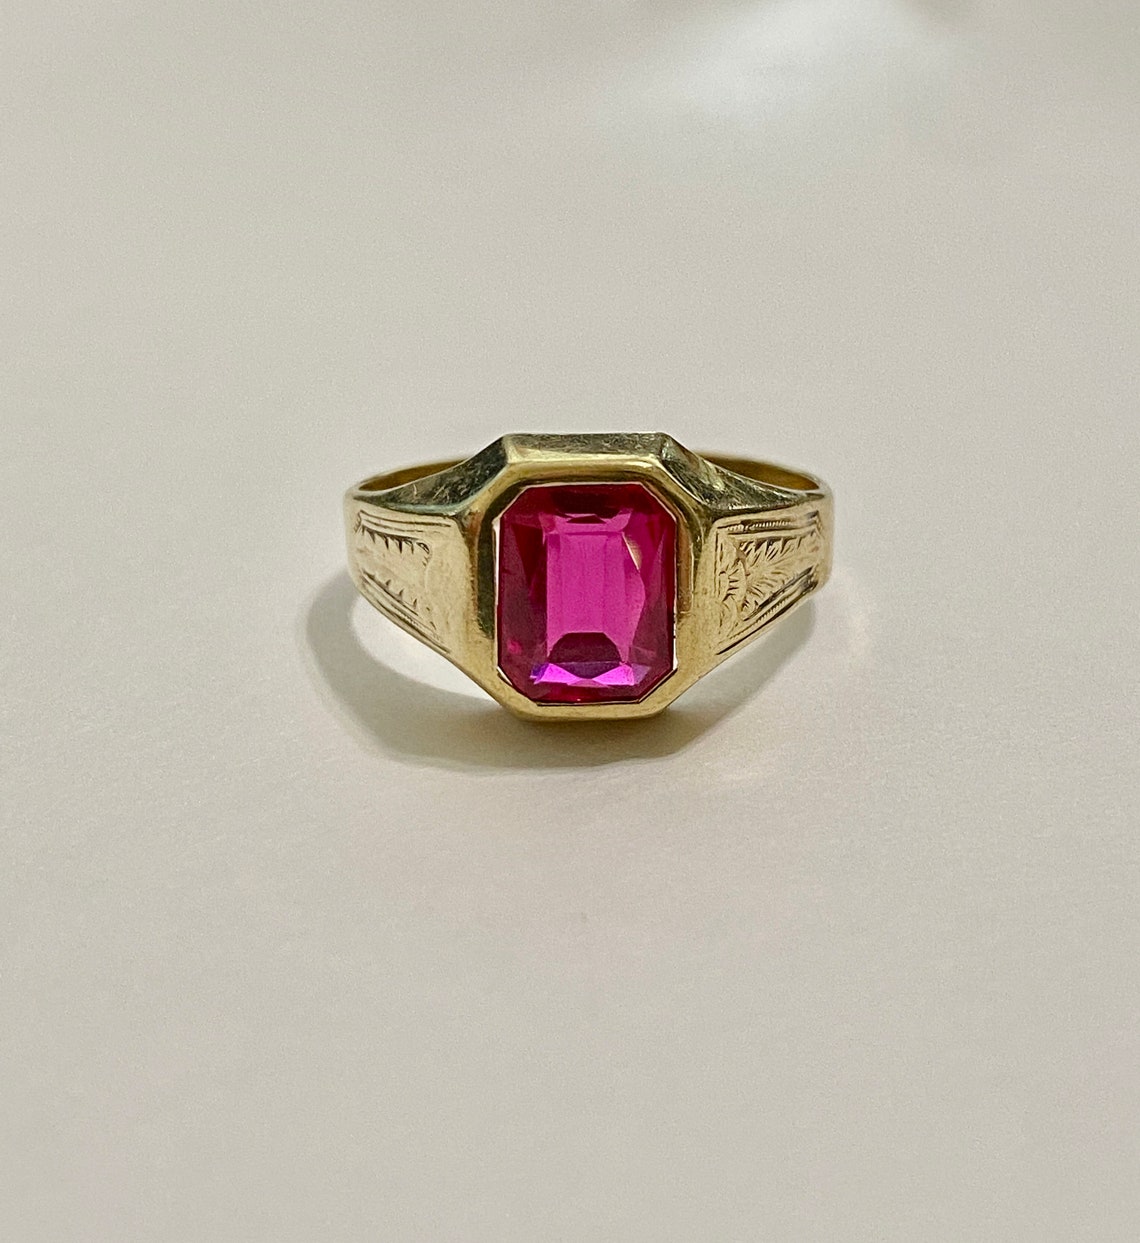 Antique 10k Yellow Gold 3.31 Carat Created Ruby Statement Ring | Etsy